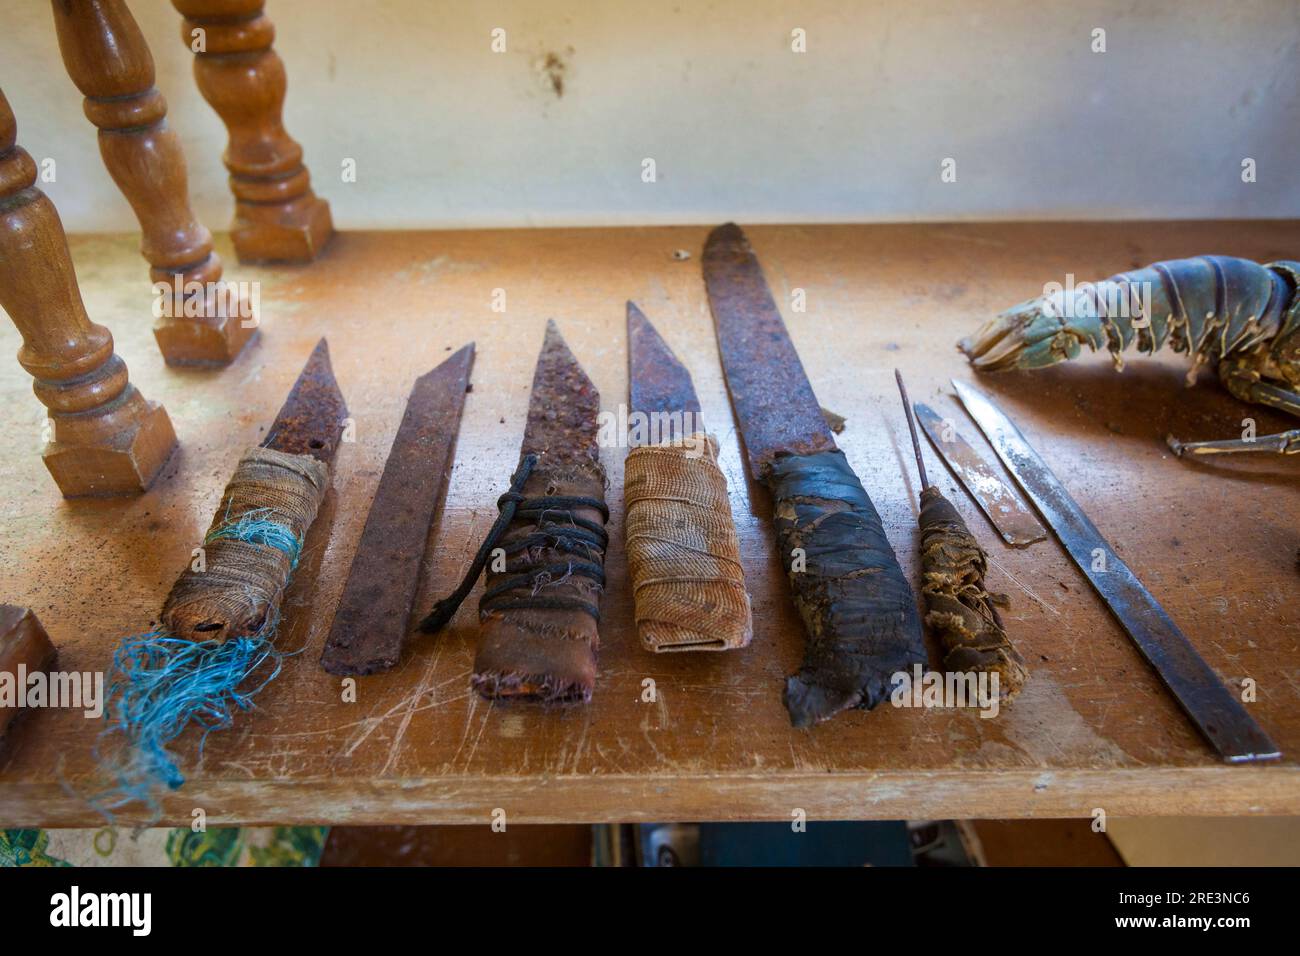 A collection of knives made by the former inmates at the Coiba Island prison at Isla de Coiba, Pacific coast, Veraguas Province, Republic of Panama. Stock Photo